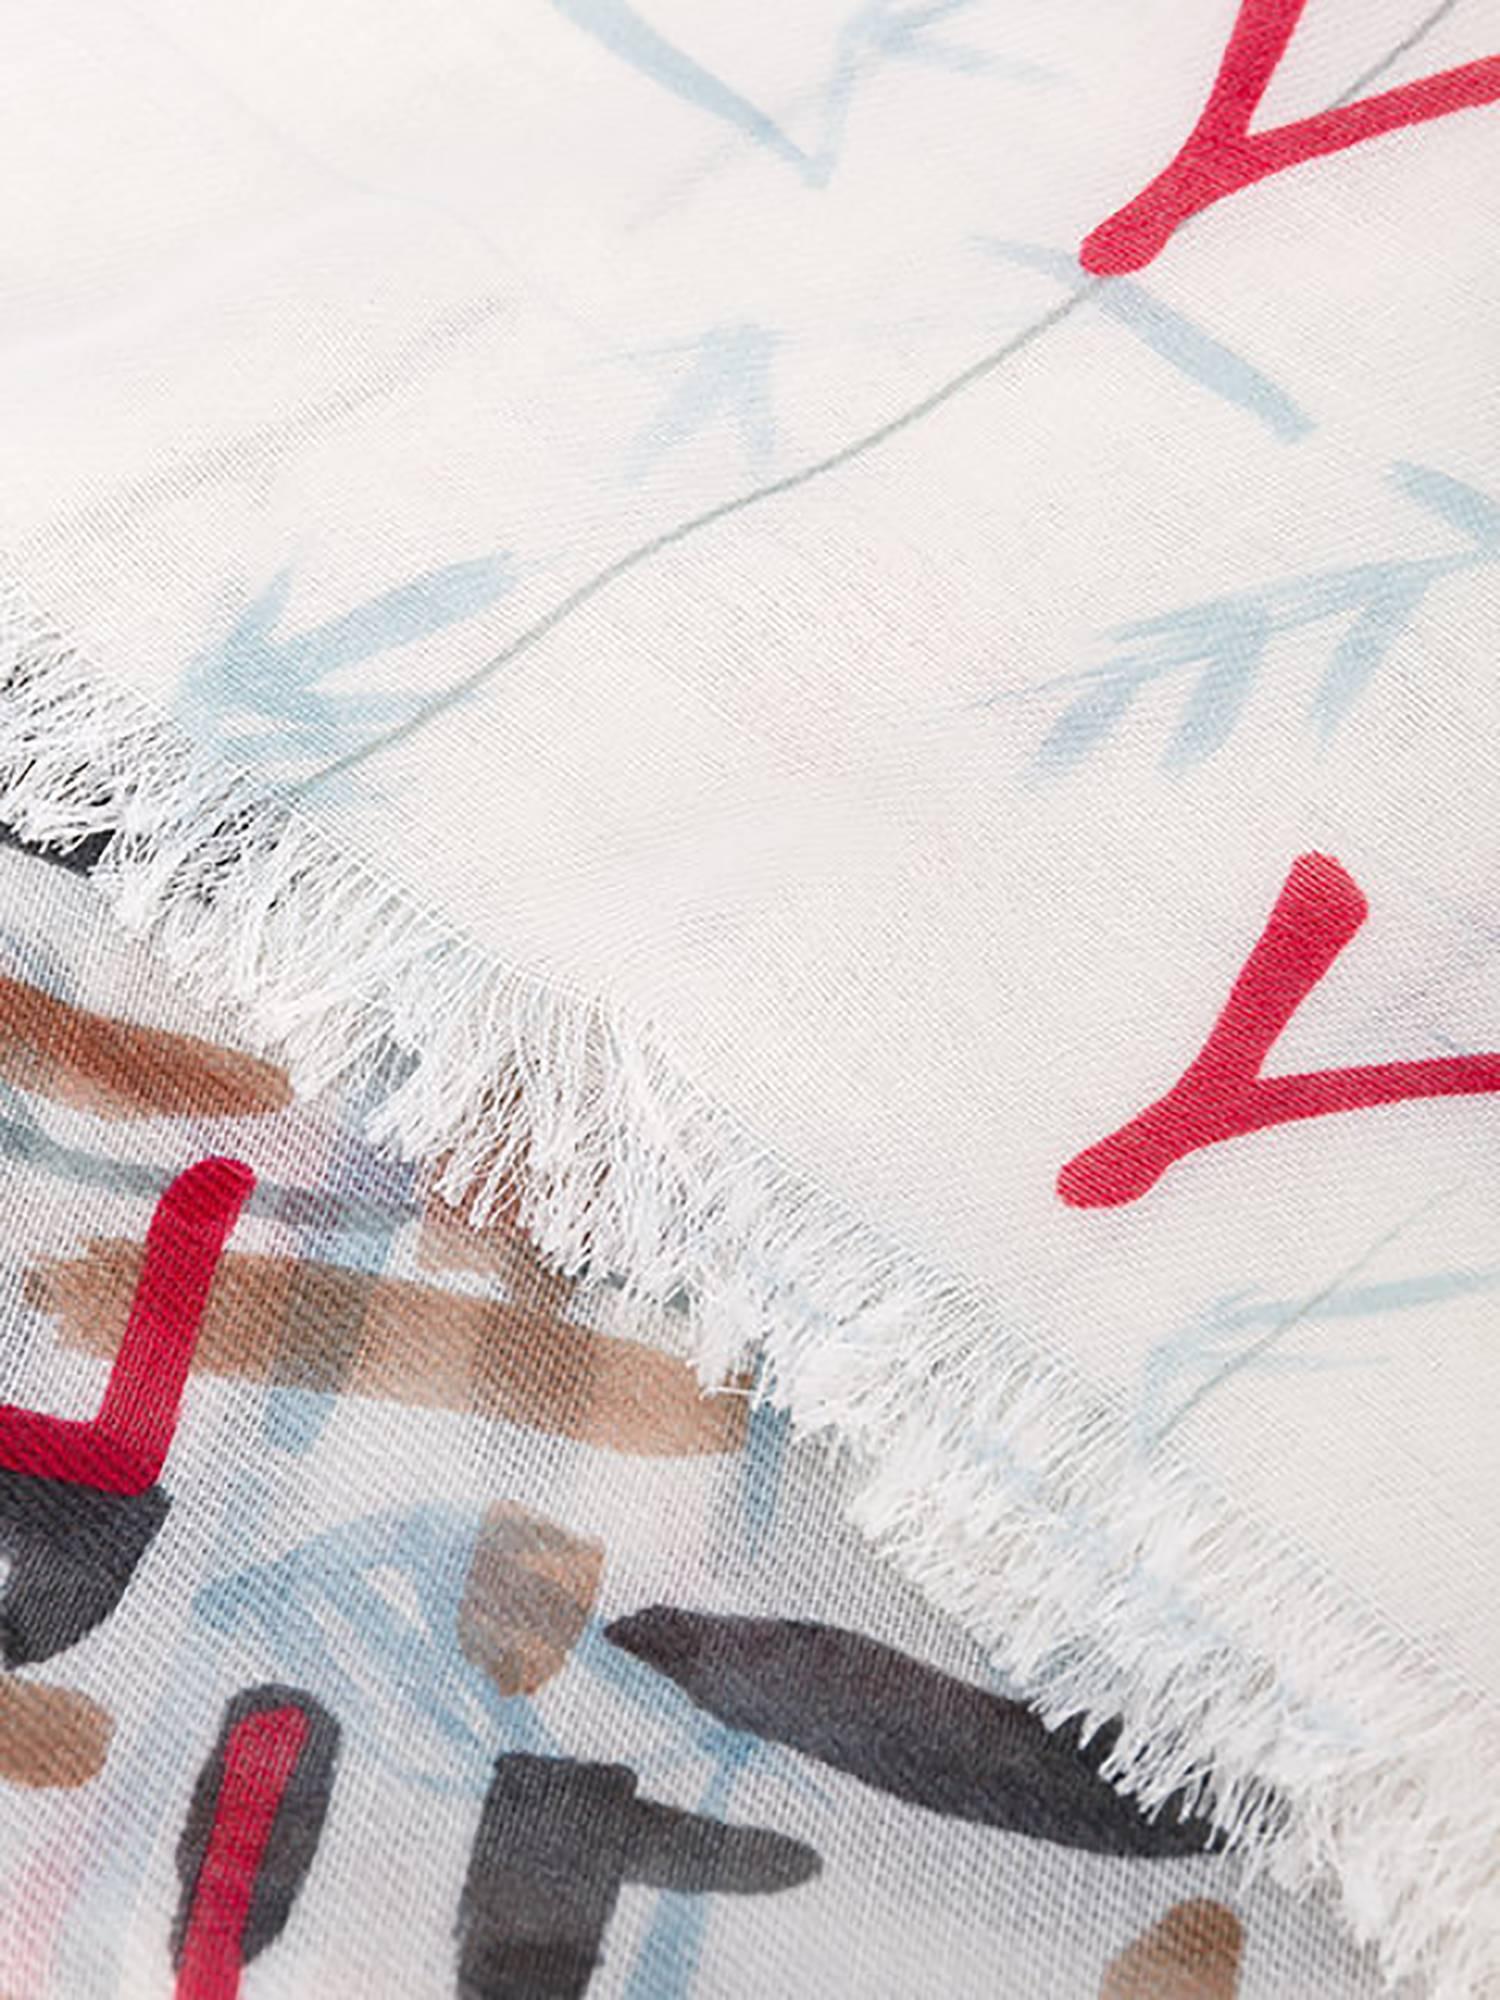 Multicoloured cashmere-cotton blend abstract print scarf from Chanel Vintage featuring fringed edges. 

Dimensions: 140cm x 140cm

Please note that vintage items are not new and therefore might have minor imperfections.

Made in Italy